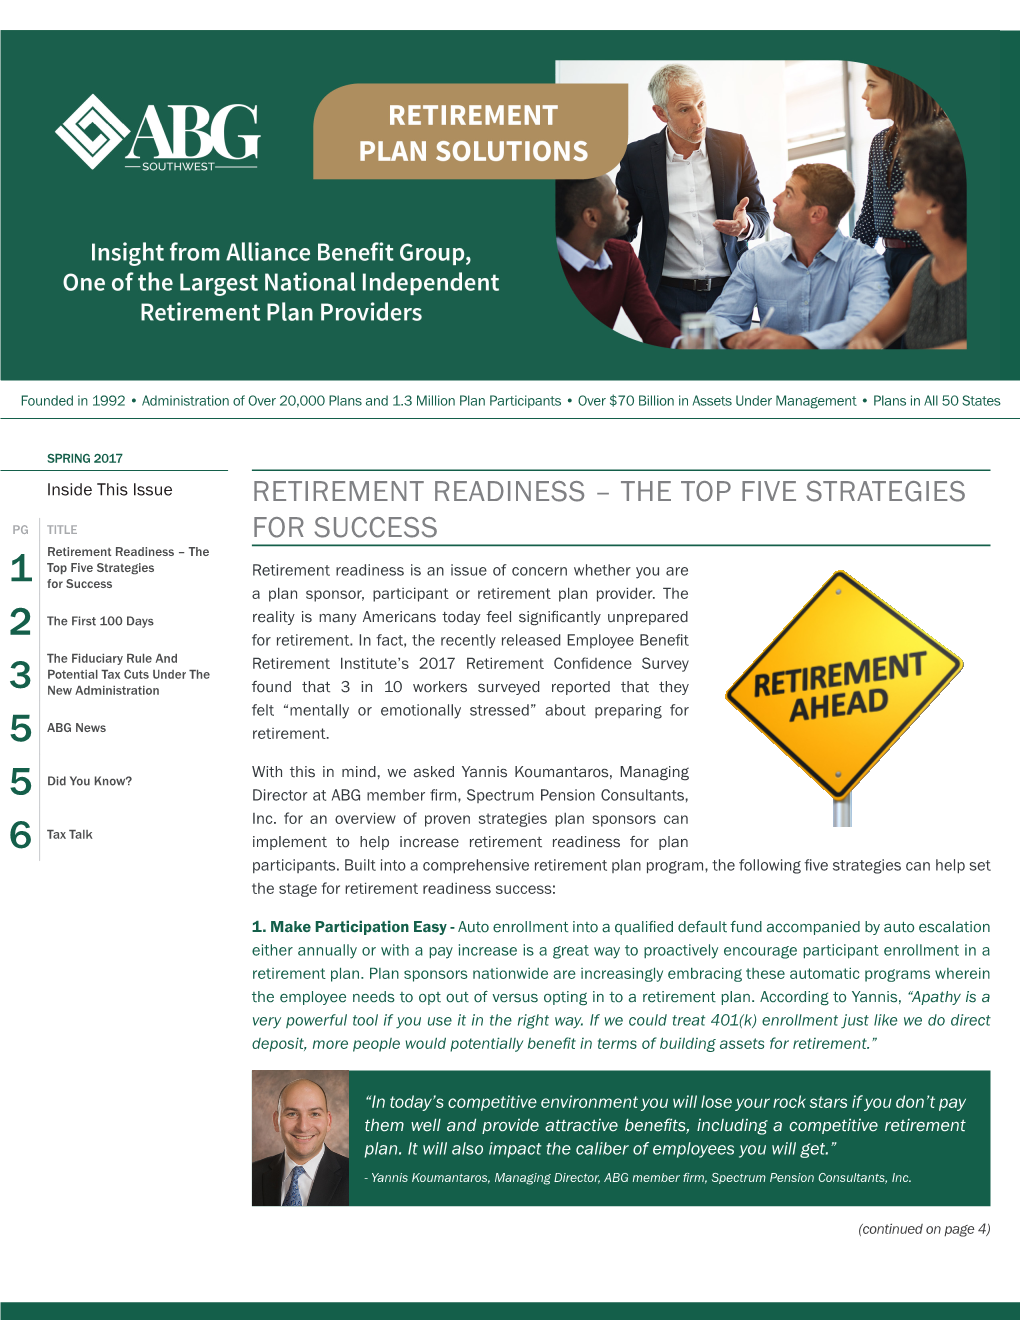 RETIREMENT READINESS – the TOP FIVE STRATEGIES for SUCCESS (Continued from Page 1)